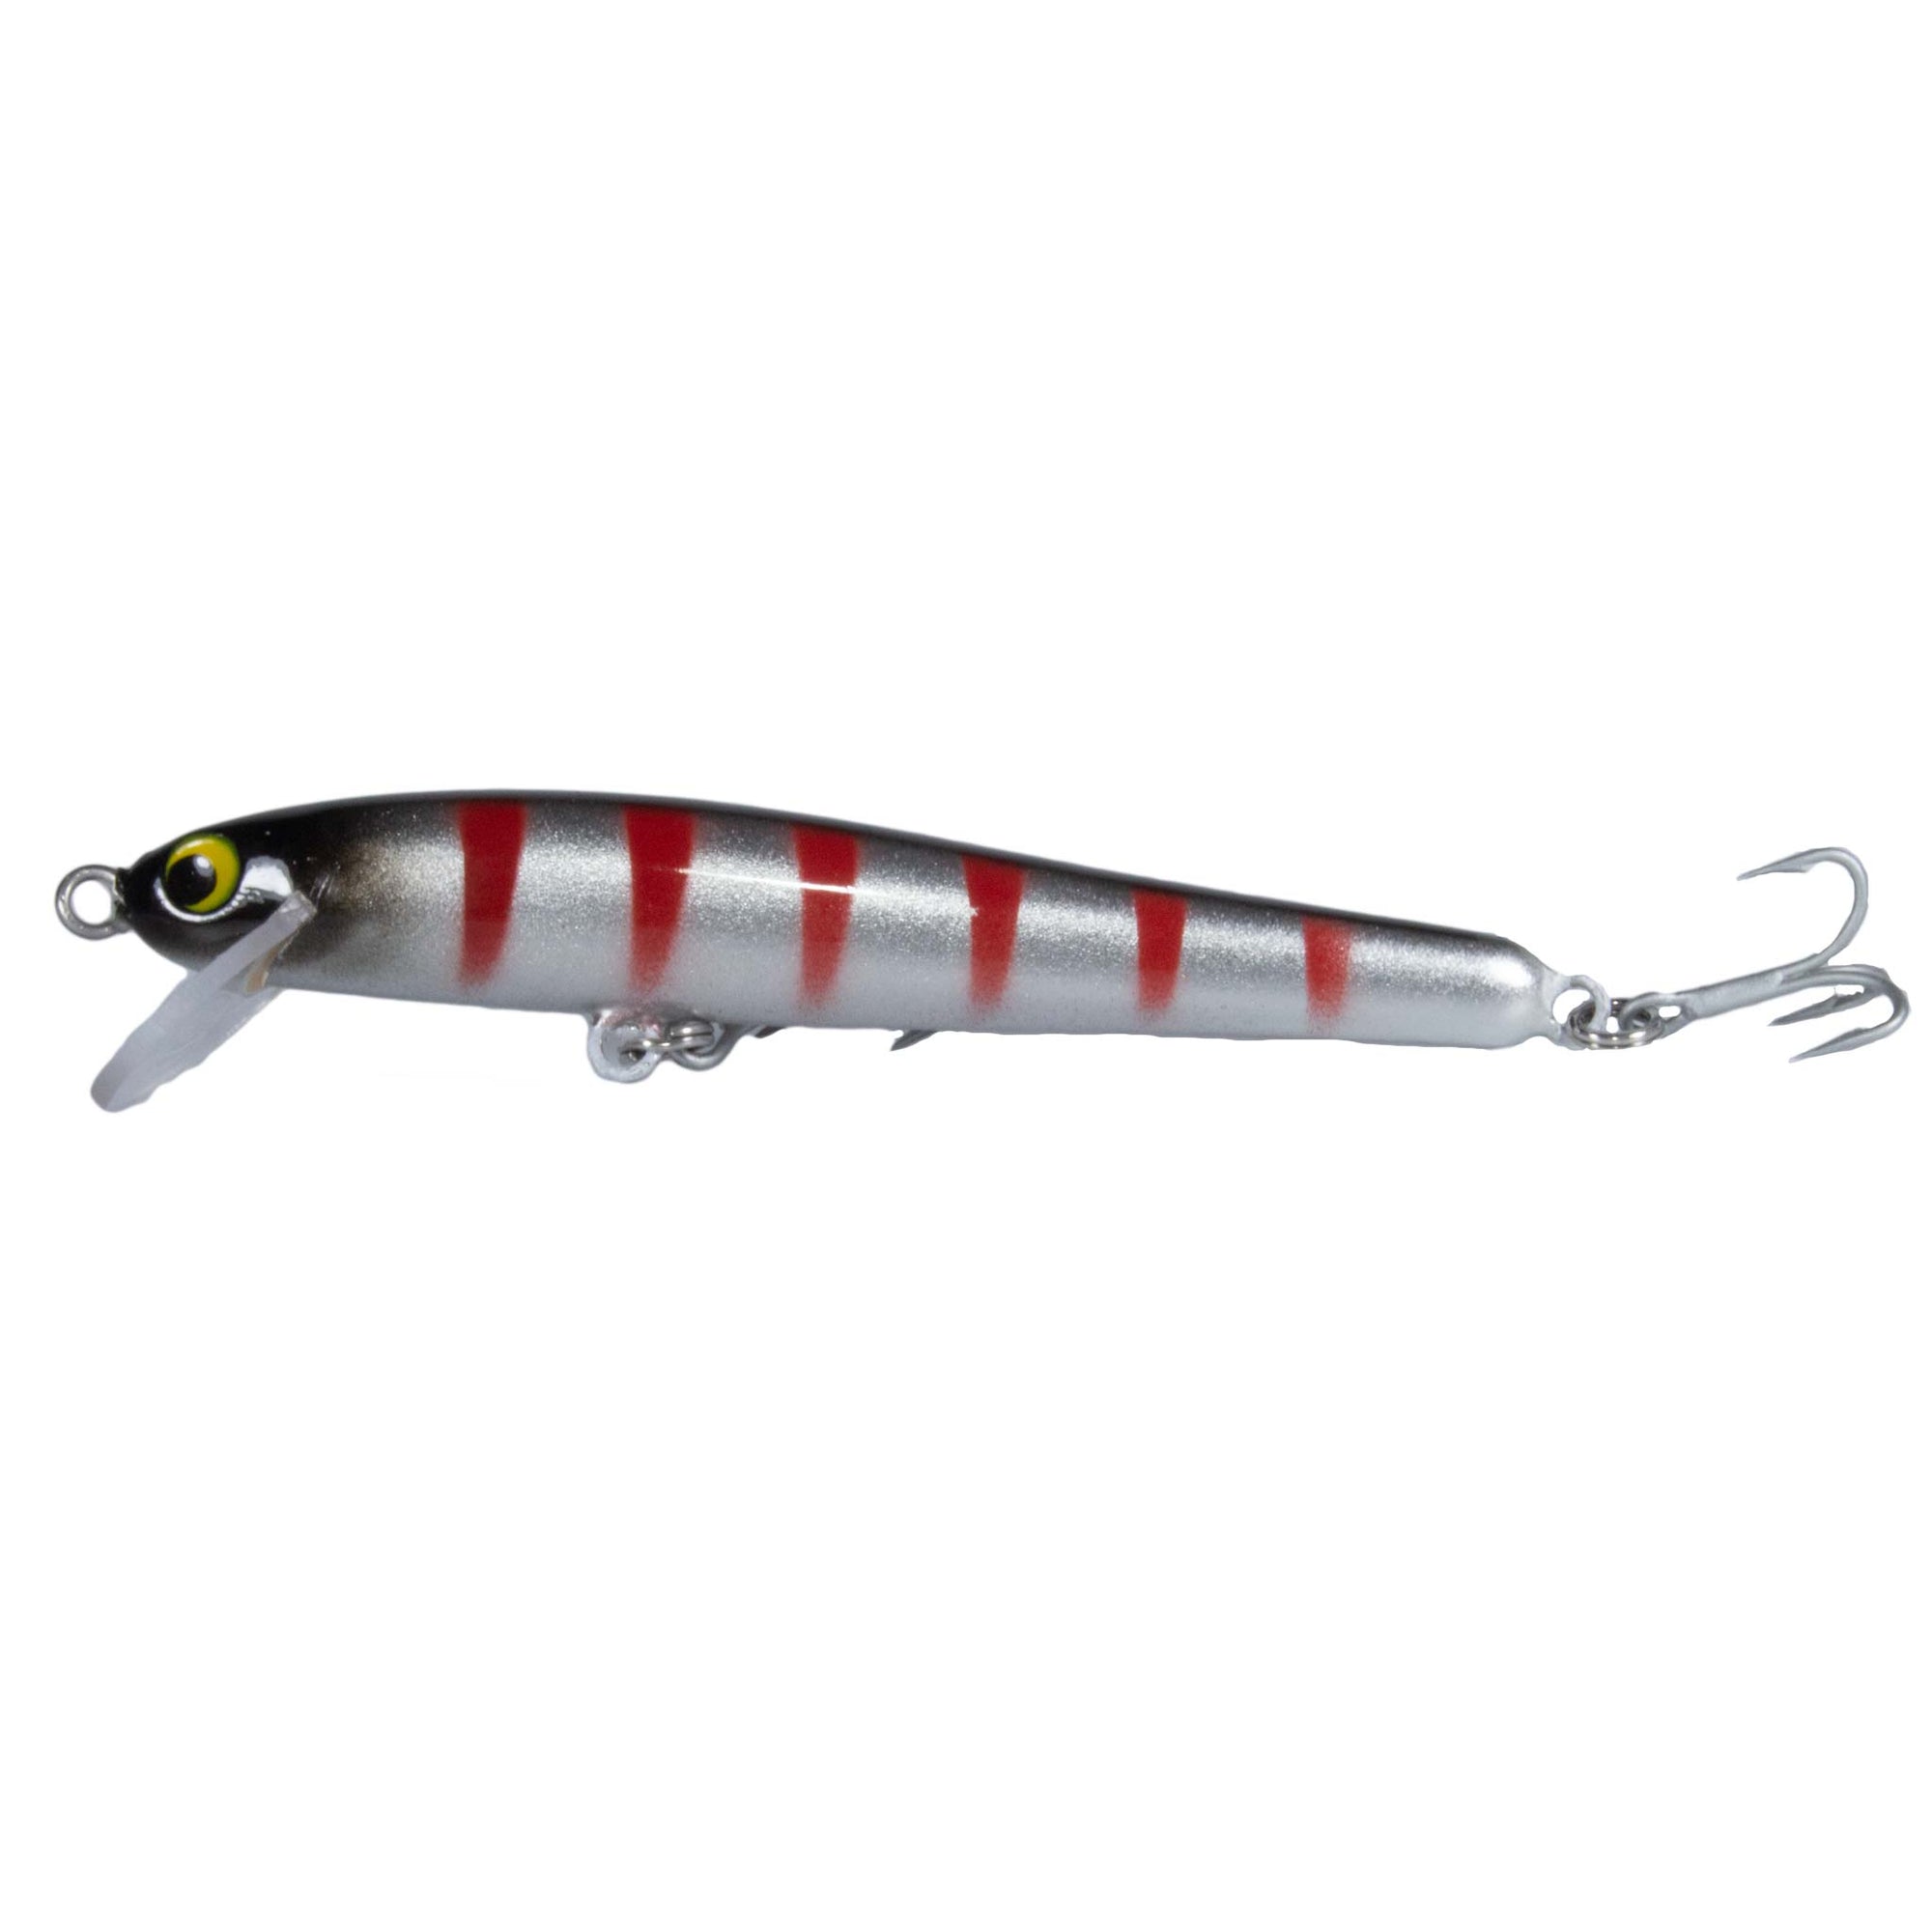 Eyecon 115 Shallow - 115mm Handcrafted Timber Fishing Lure